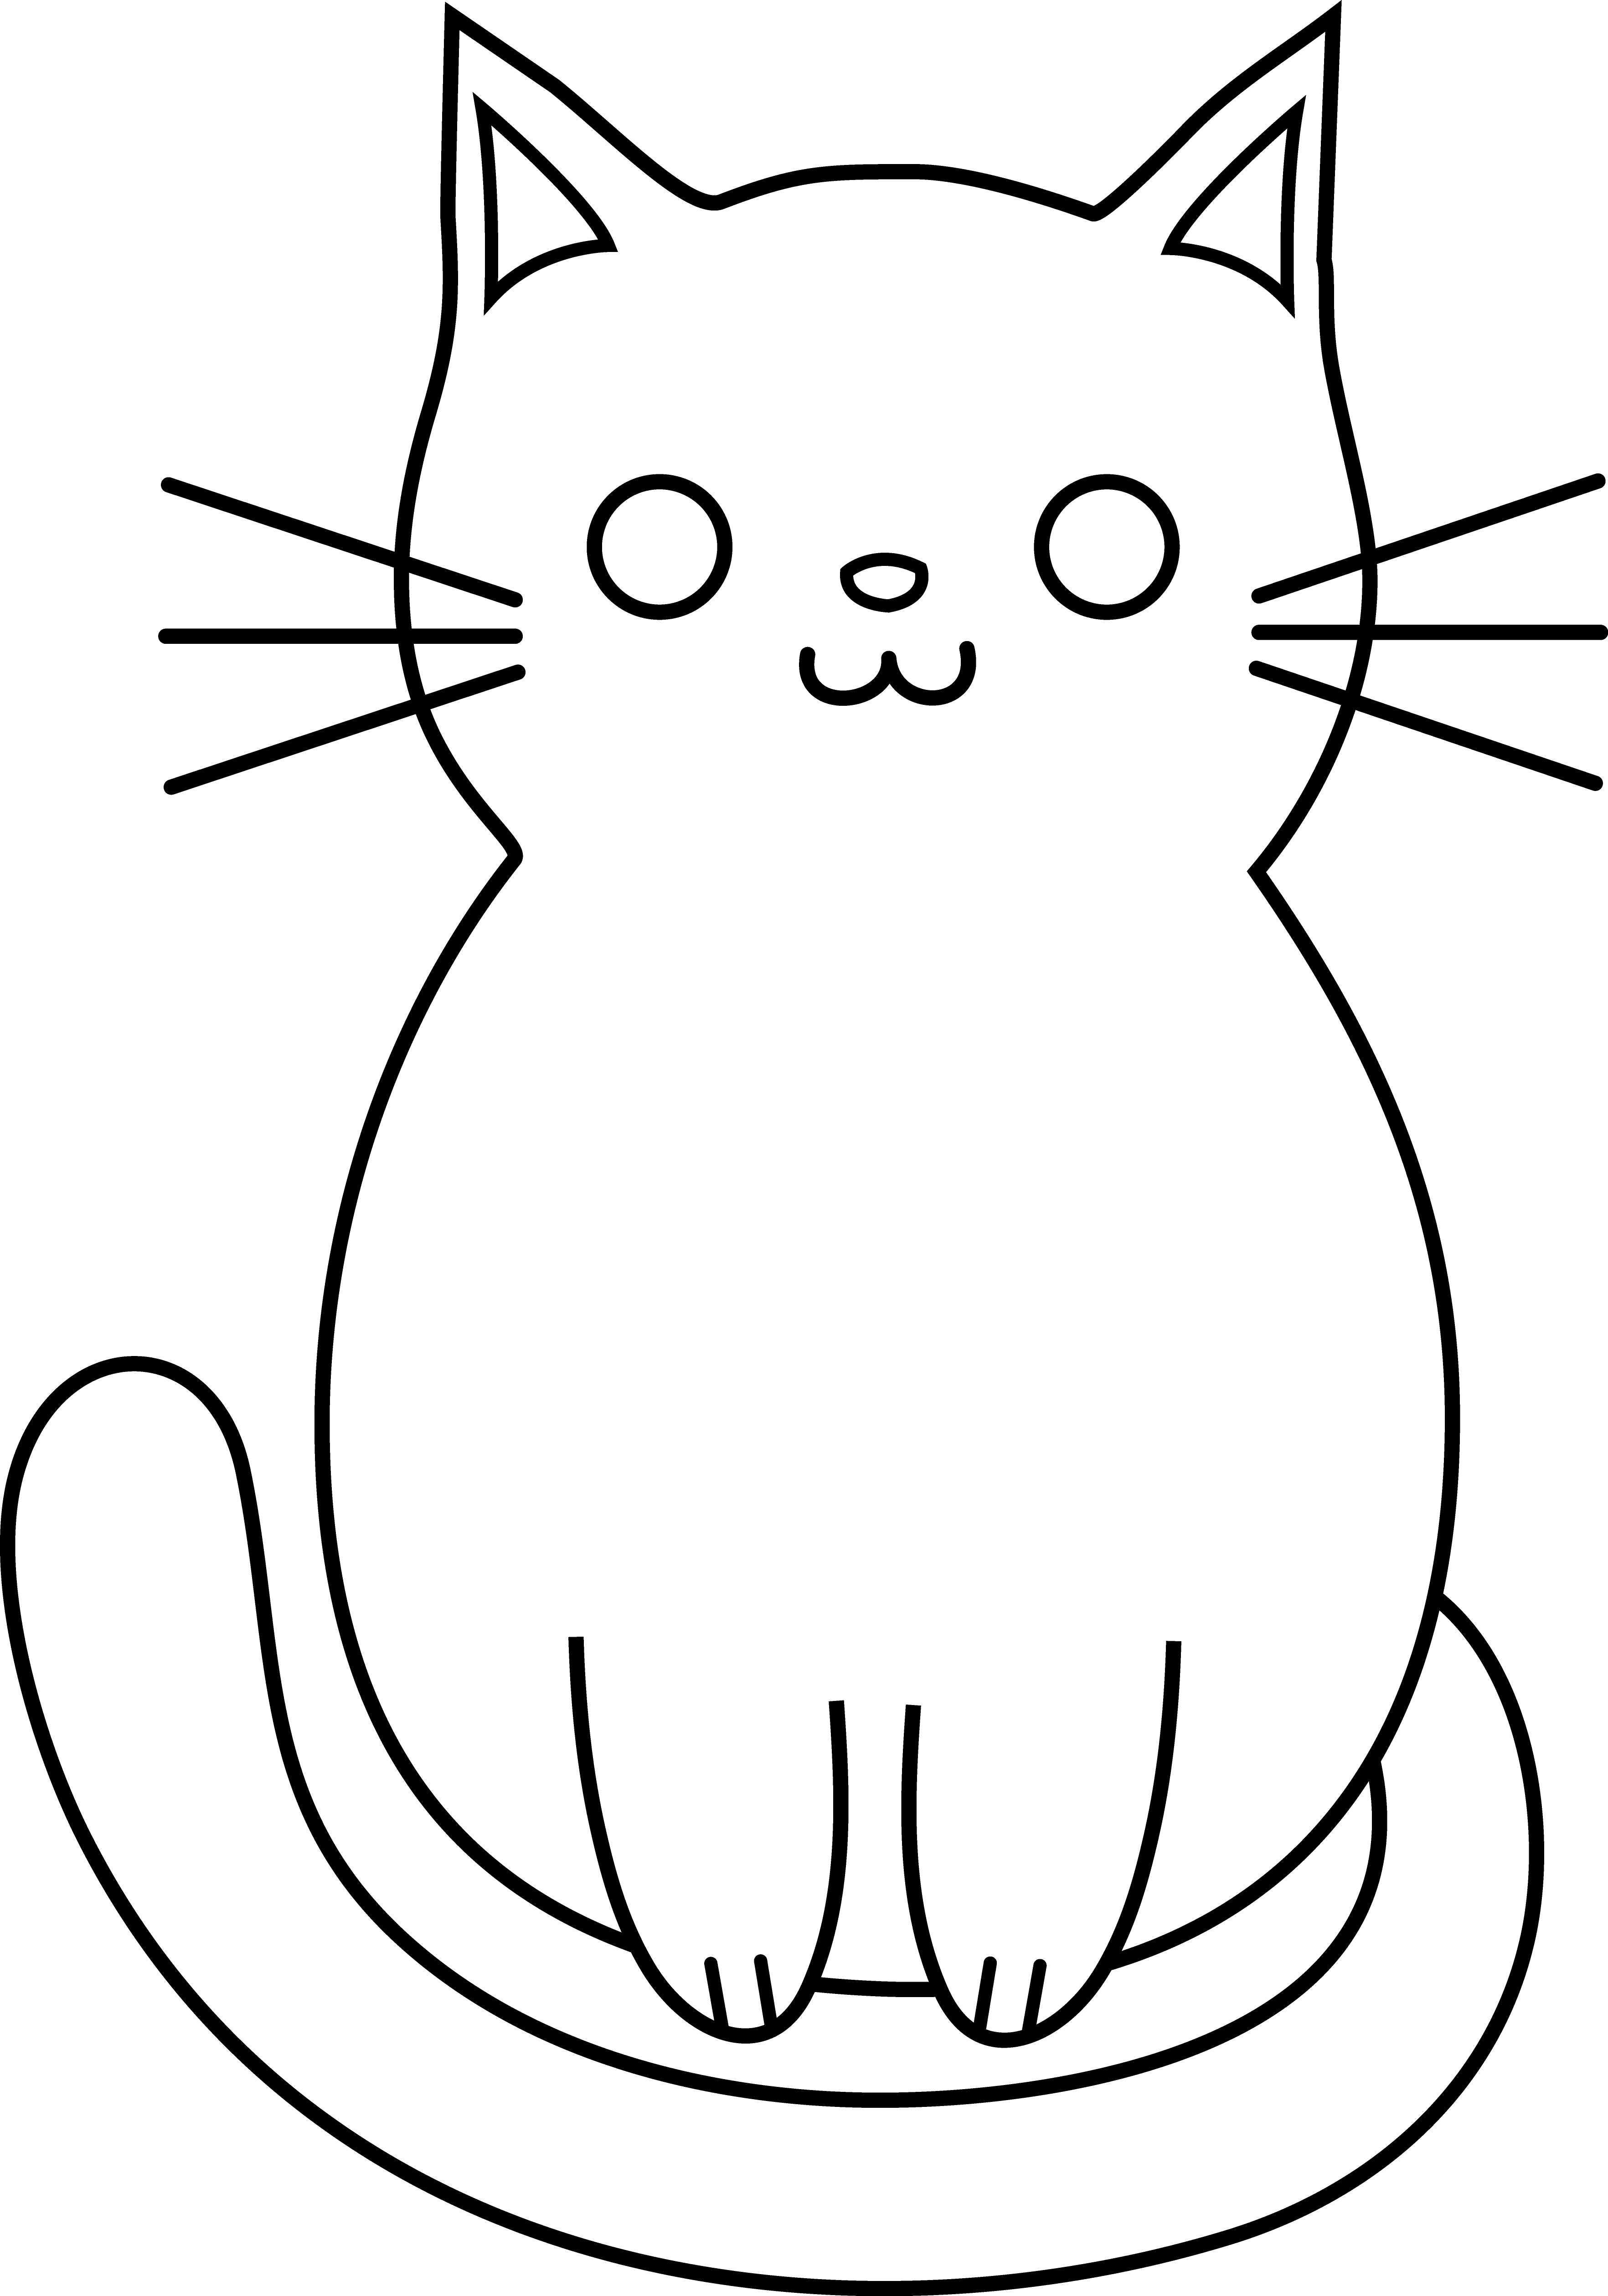 Cute Dog And Cat Clipart | Clipart library - Free Clipart Images